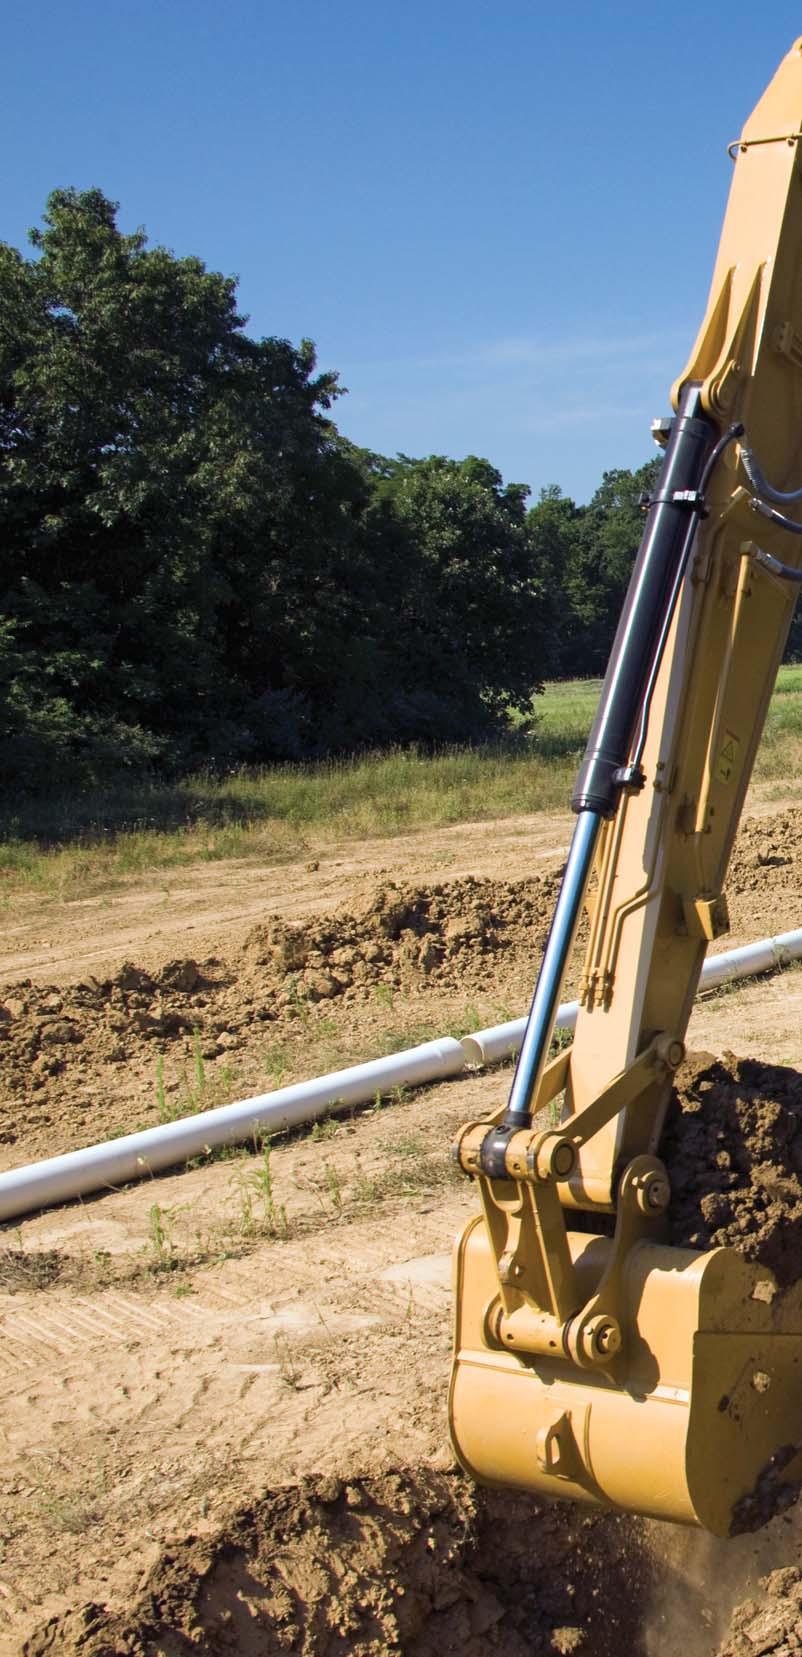 Introduction The Cat 313F L is a perfect choice for customers who value reliability, durability, and maximum efficiency to get work done. The C4.4 ACERT engine meets U.S.